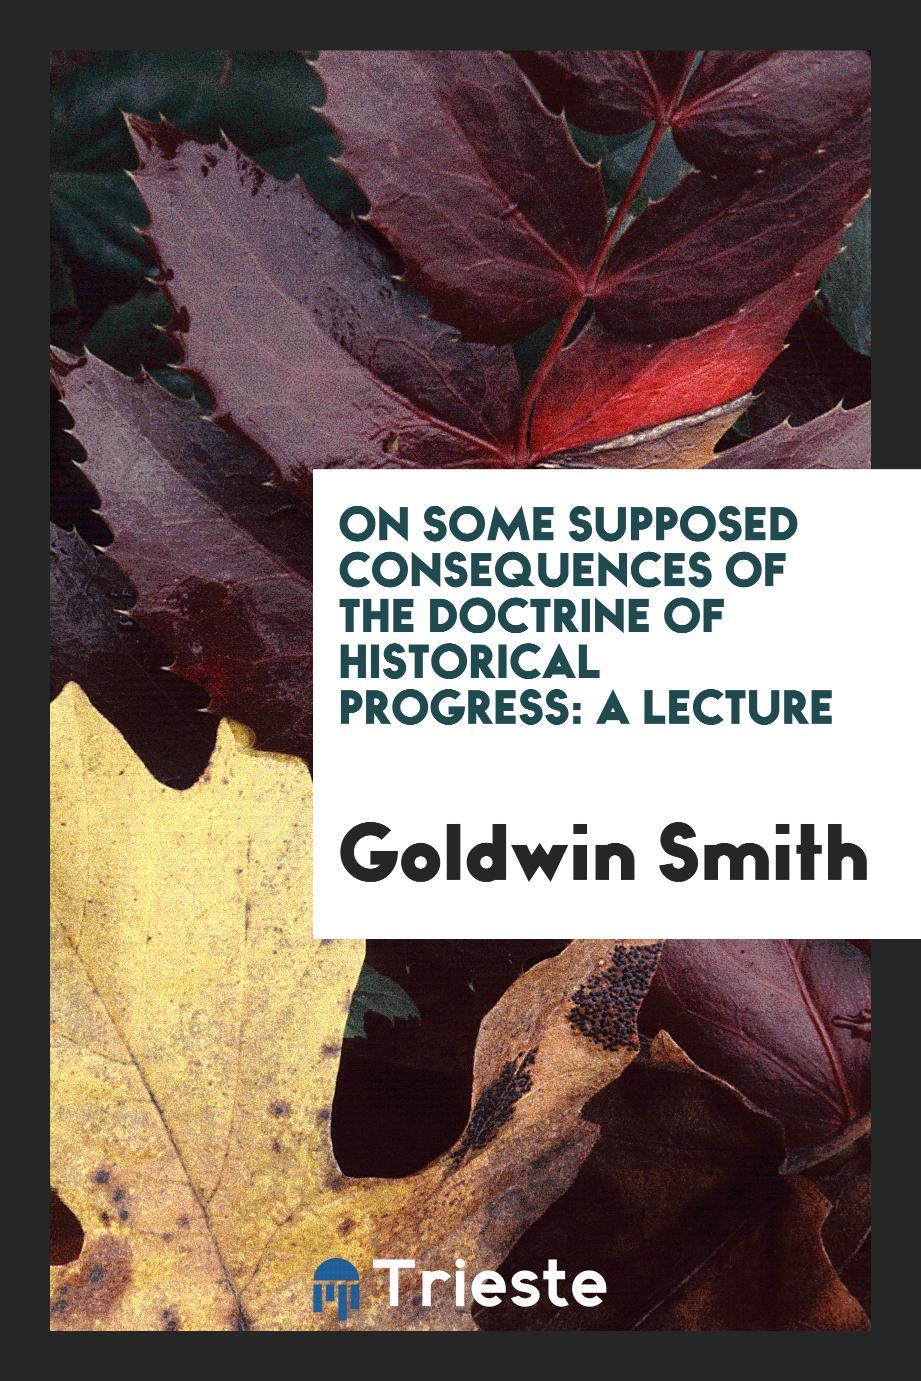 On some supposed consequences of the doctrine of historical progress: a lecture